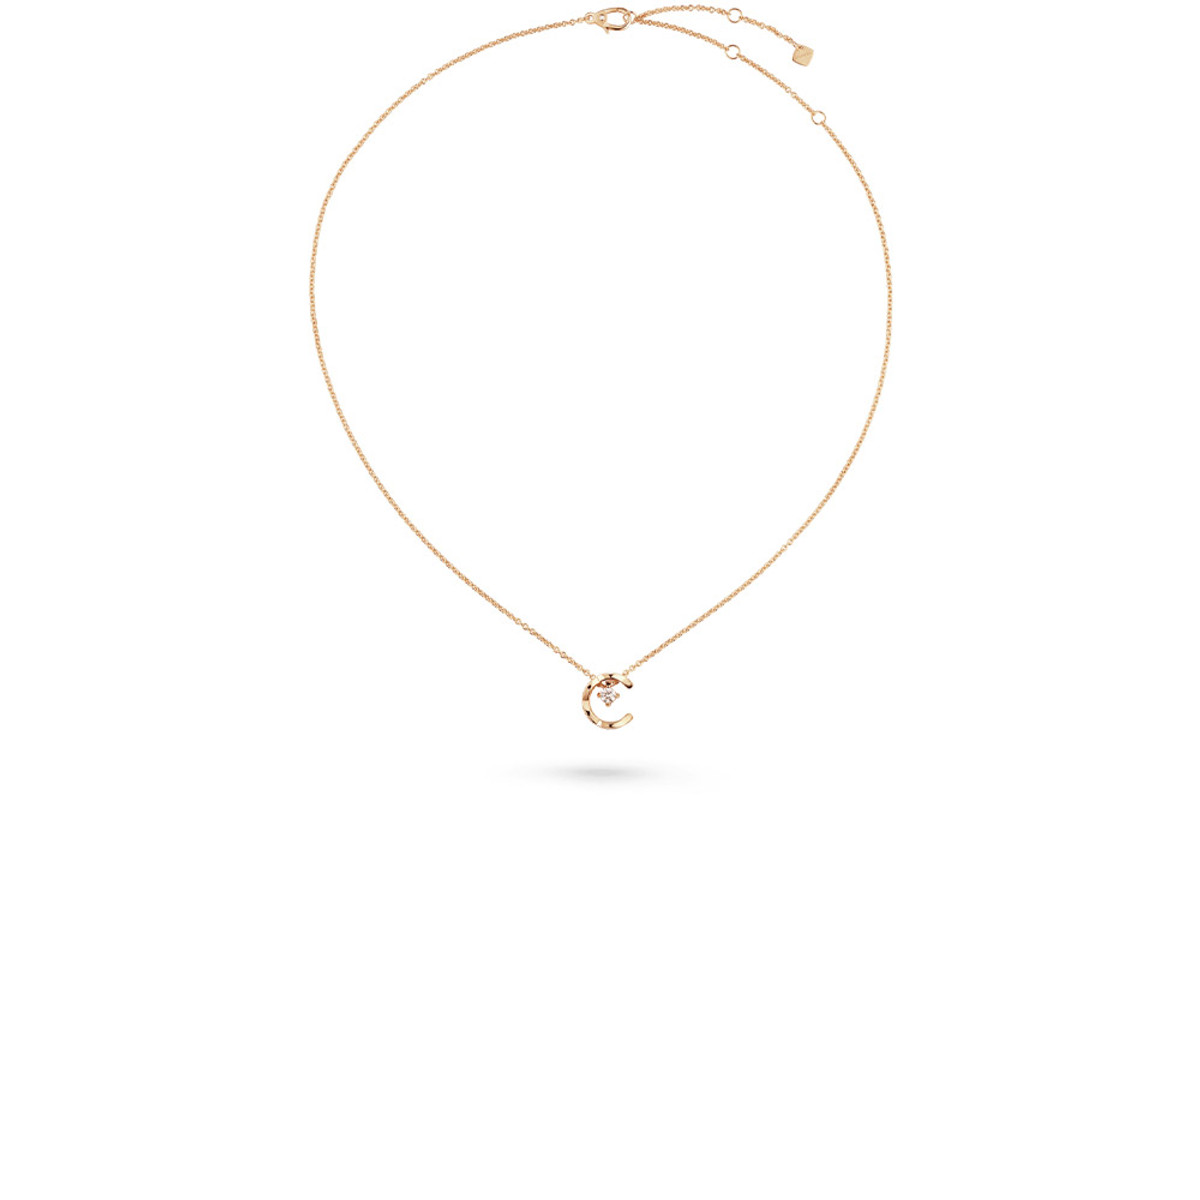 CHANEL COCO NECKLACE-39078 Product Image